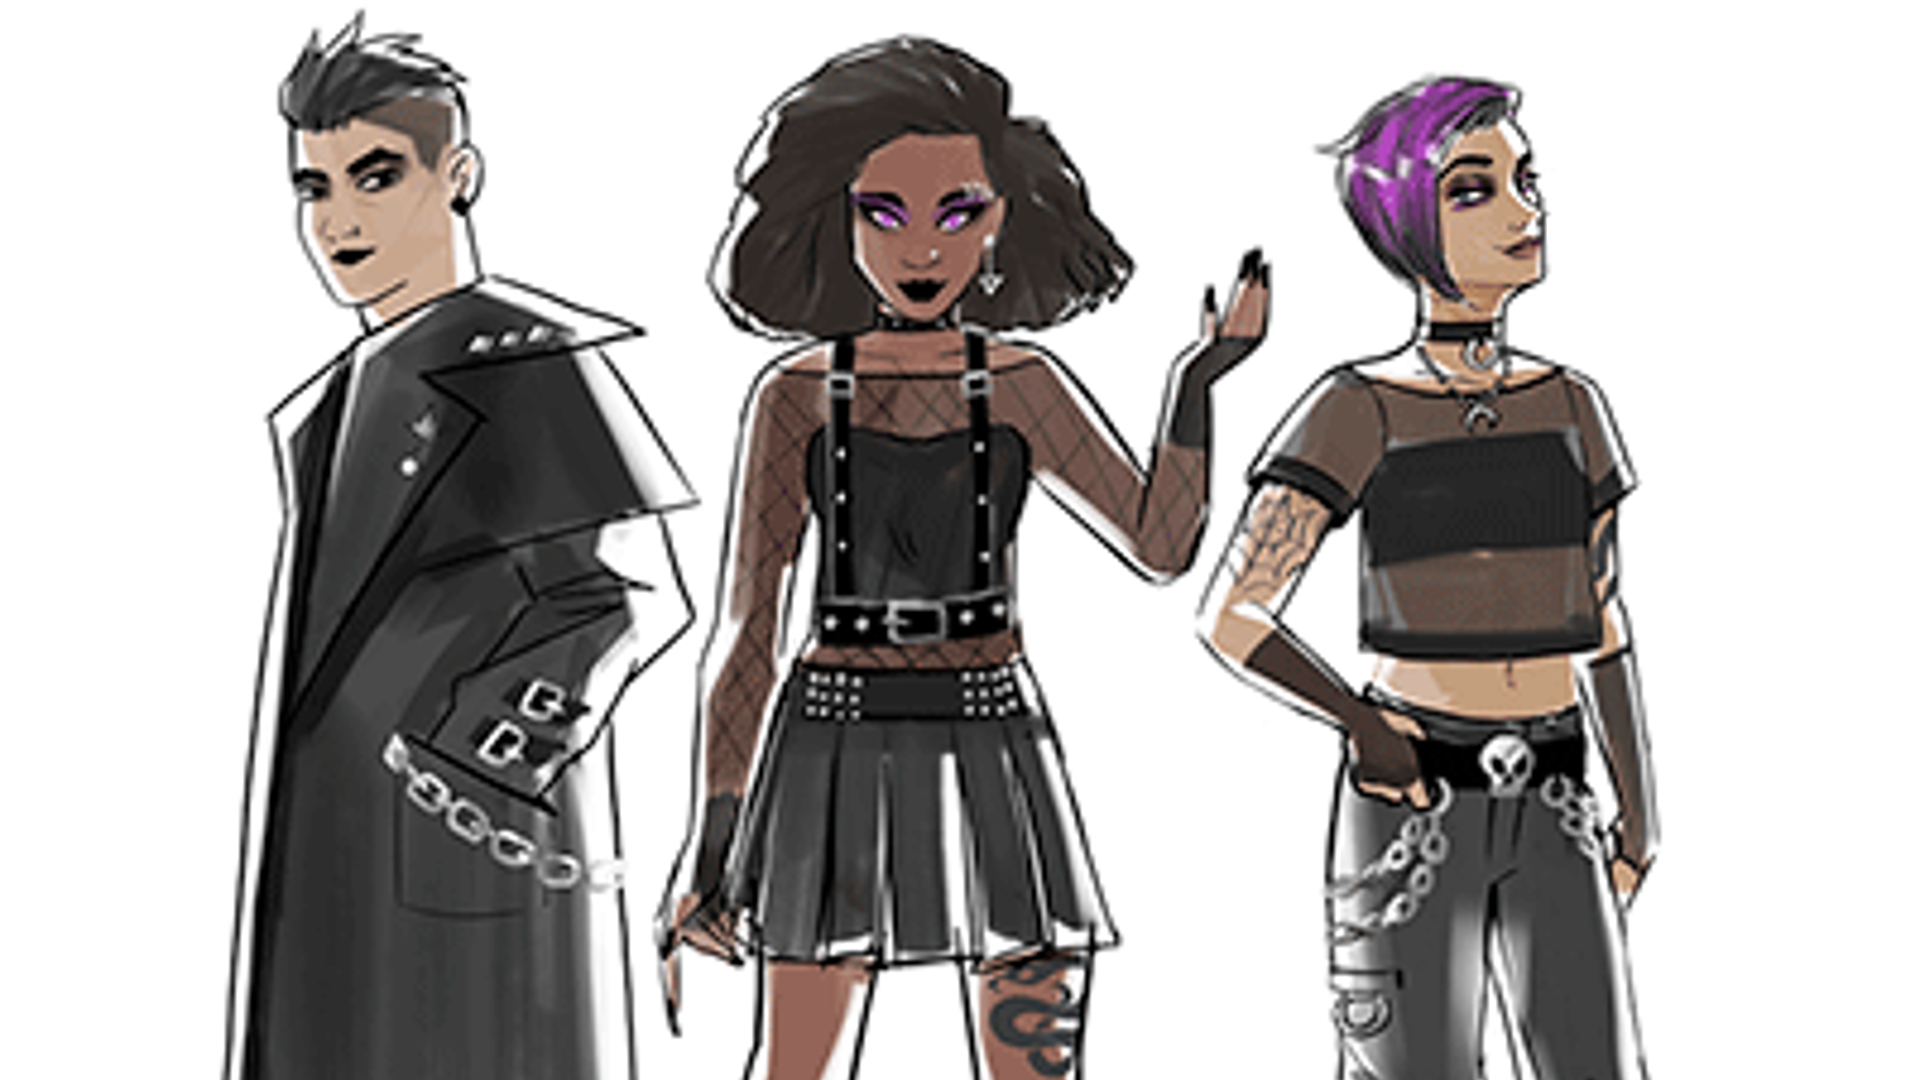 The Sims 4 community has chosen, and it chose goth girls